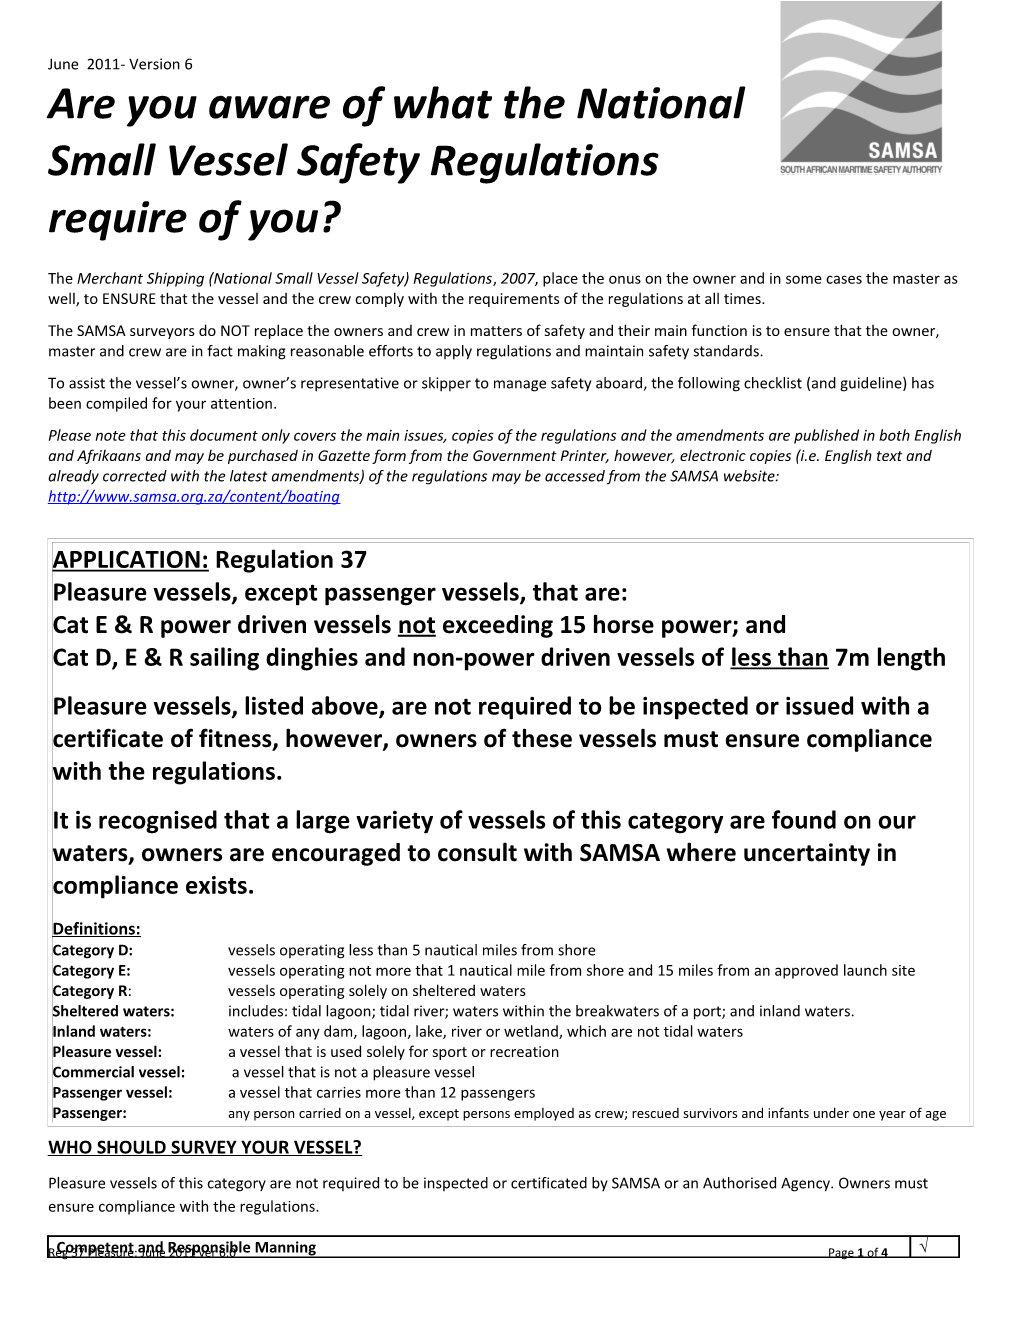 Are You Aware of What the National Small Vessel Safety Regulations Require of You?